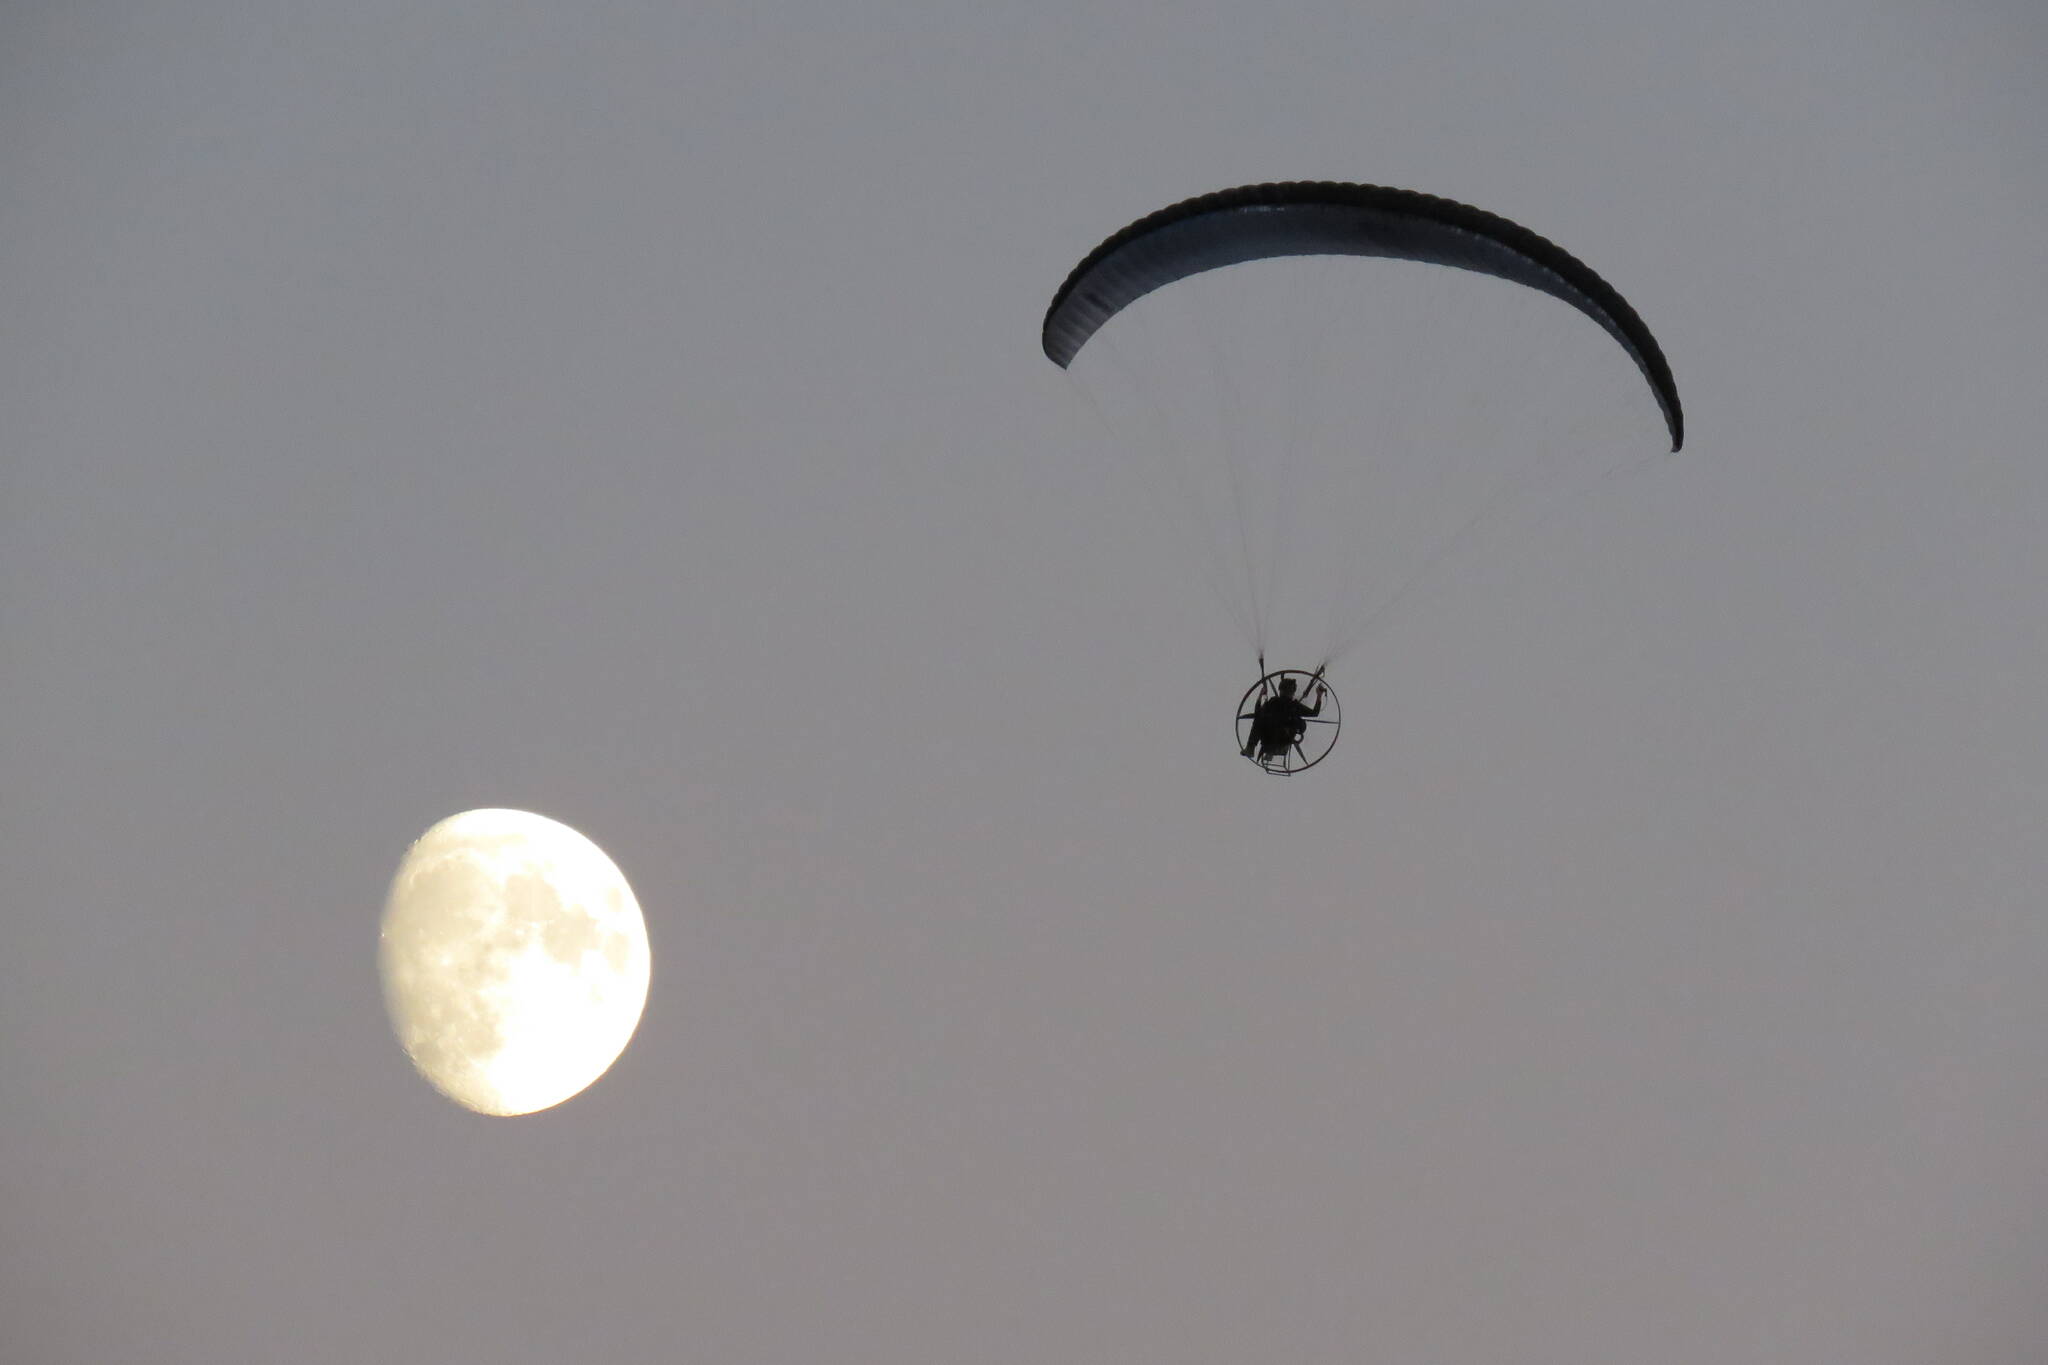 A glider sails over North Cowichan on the evening of Aug. 8, with the moon as a dramatic backdrop in the crystal clear skies. (Cheryl Trudell photo/Citizen)